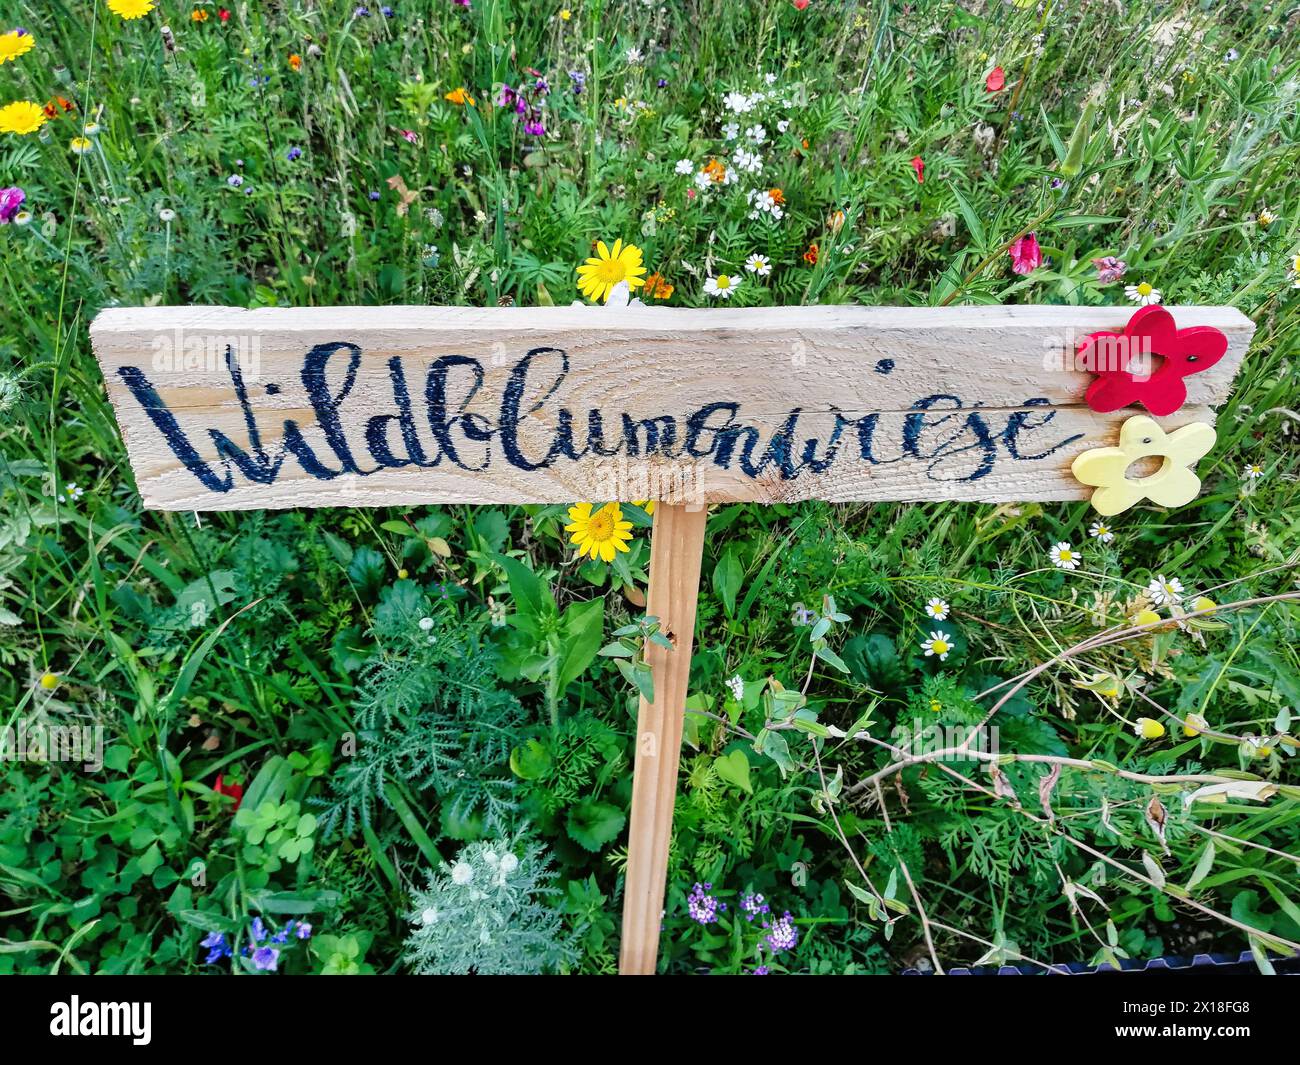 Experience the Beauty of a Blooming Wildflower Meadow with Handwritten Wooden Sign 'Wildflower Meadow'. Stock Photo